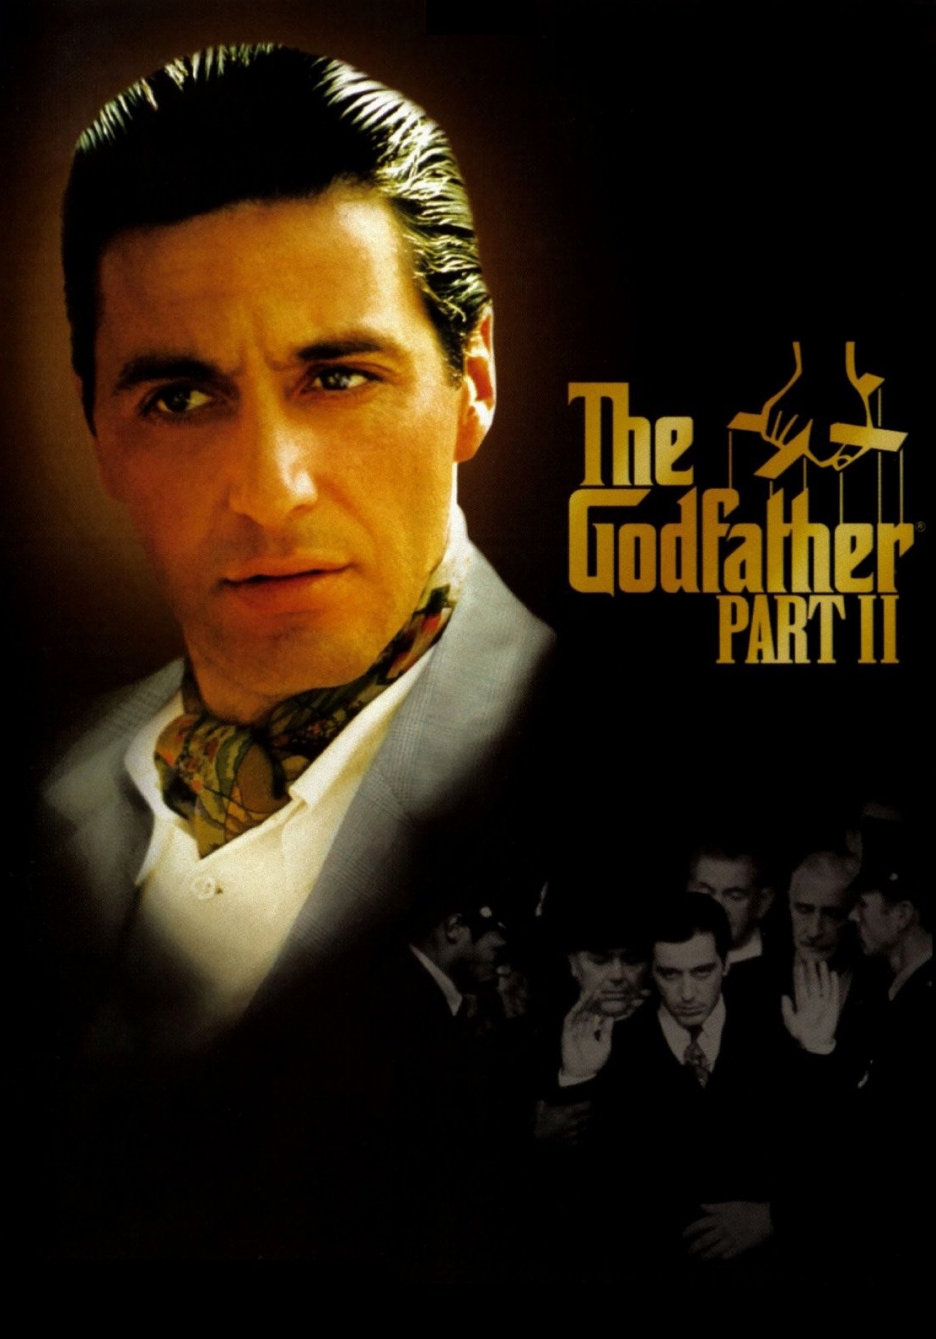 the_godfather_part_2_poster.jpg